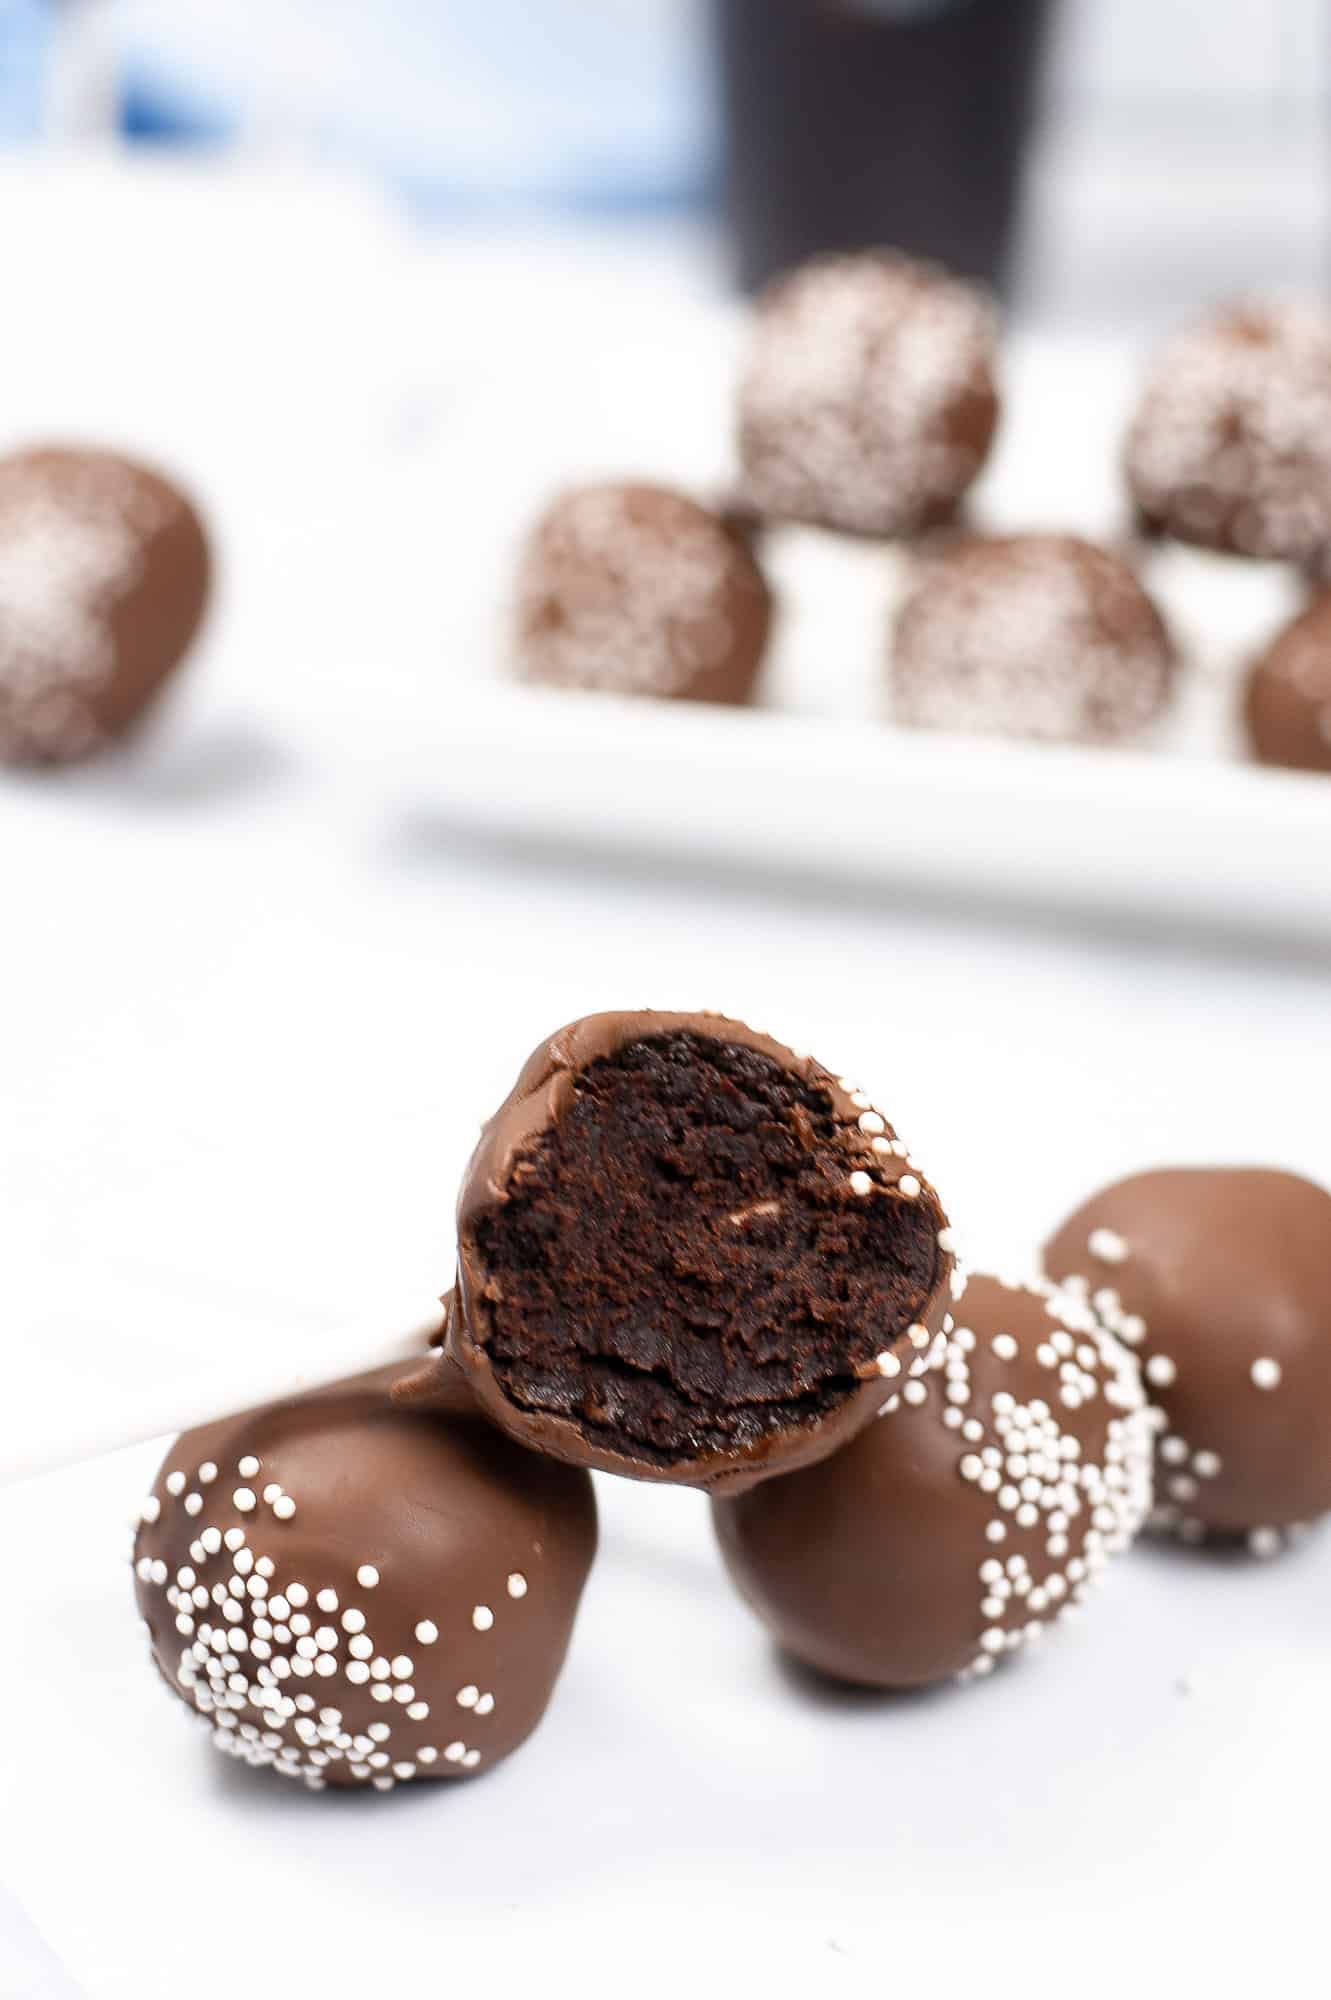 How to Make Incredibly Easy and Authentic Starbucks Chocolate Cake Pops ...